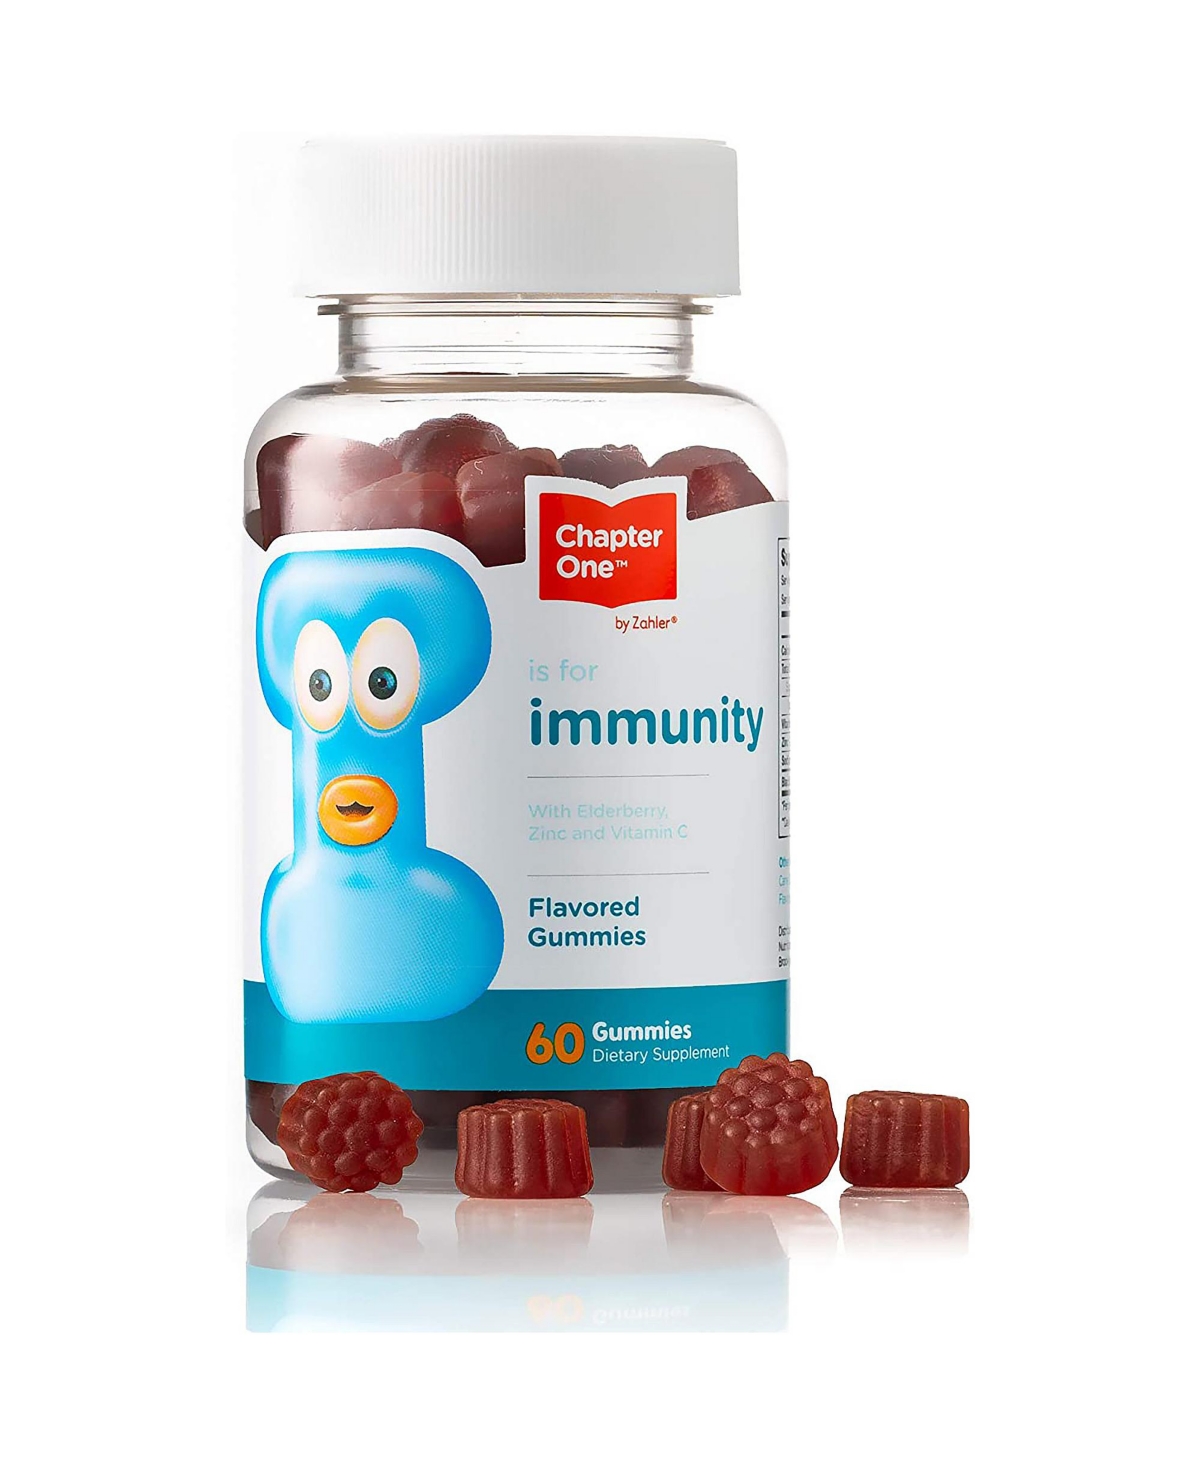 Chapter One Immunity with Zinc and Vitamin C - 60 Flavored Gummies